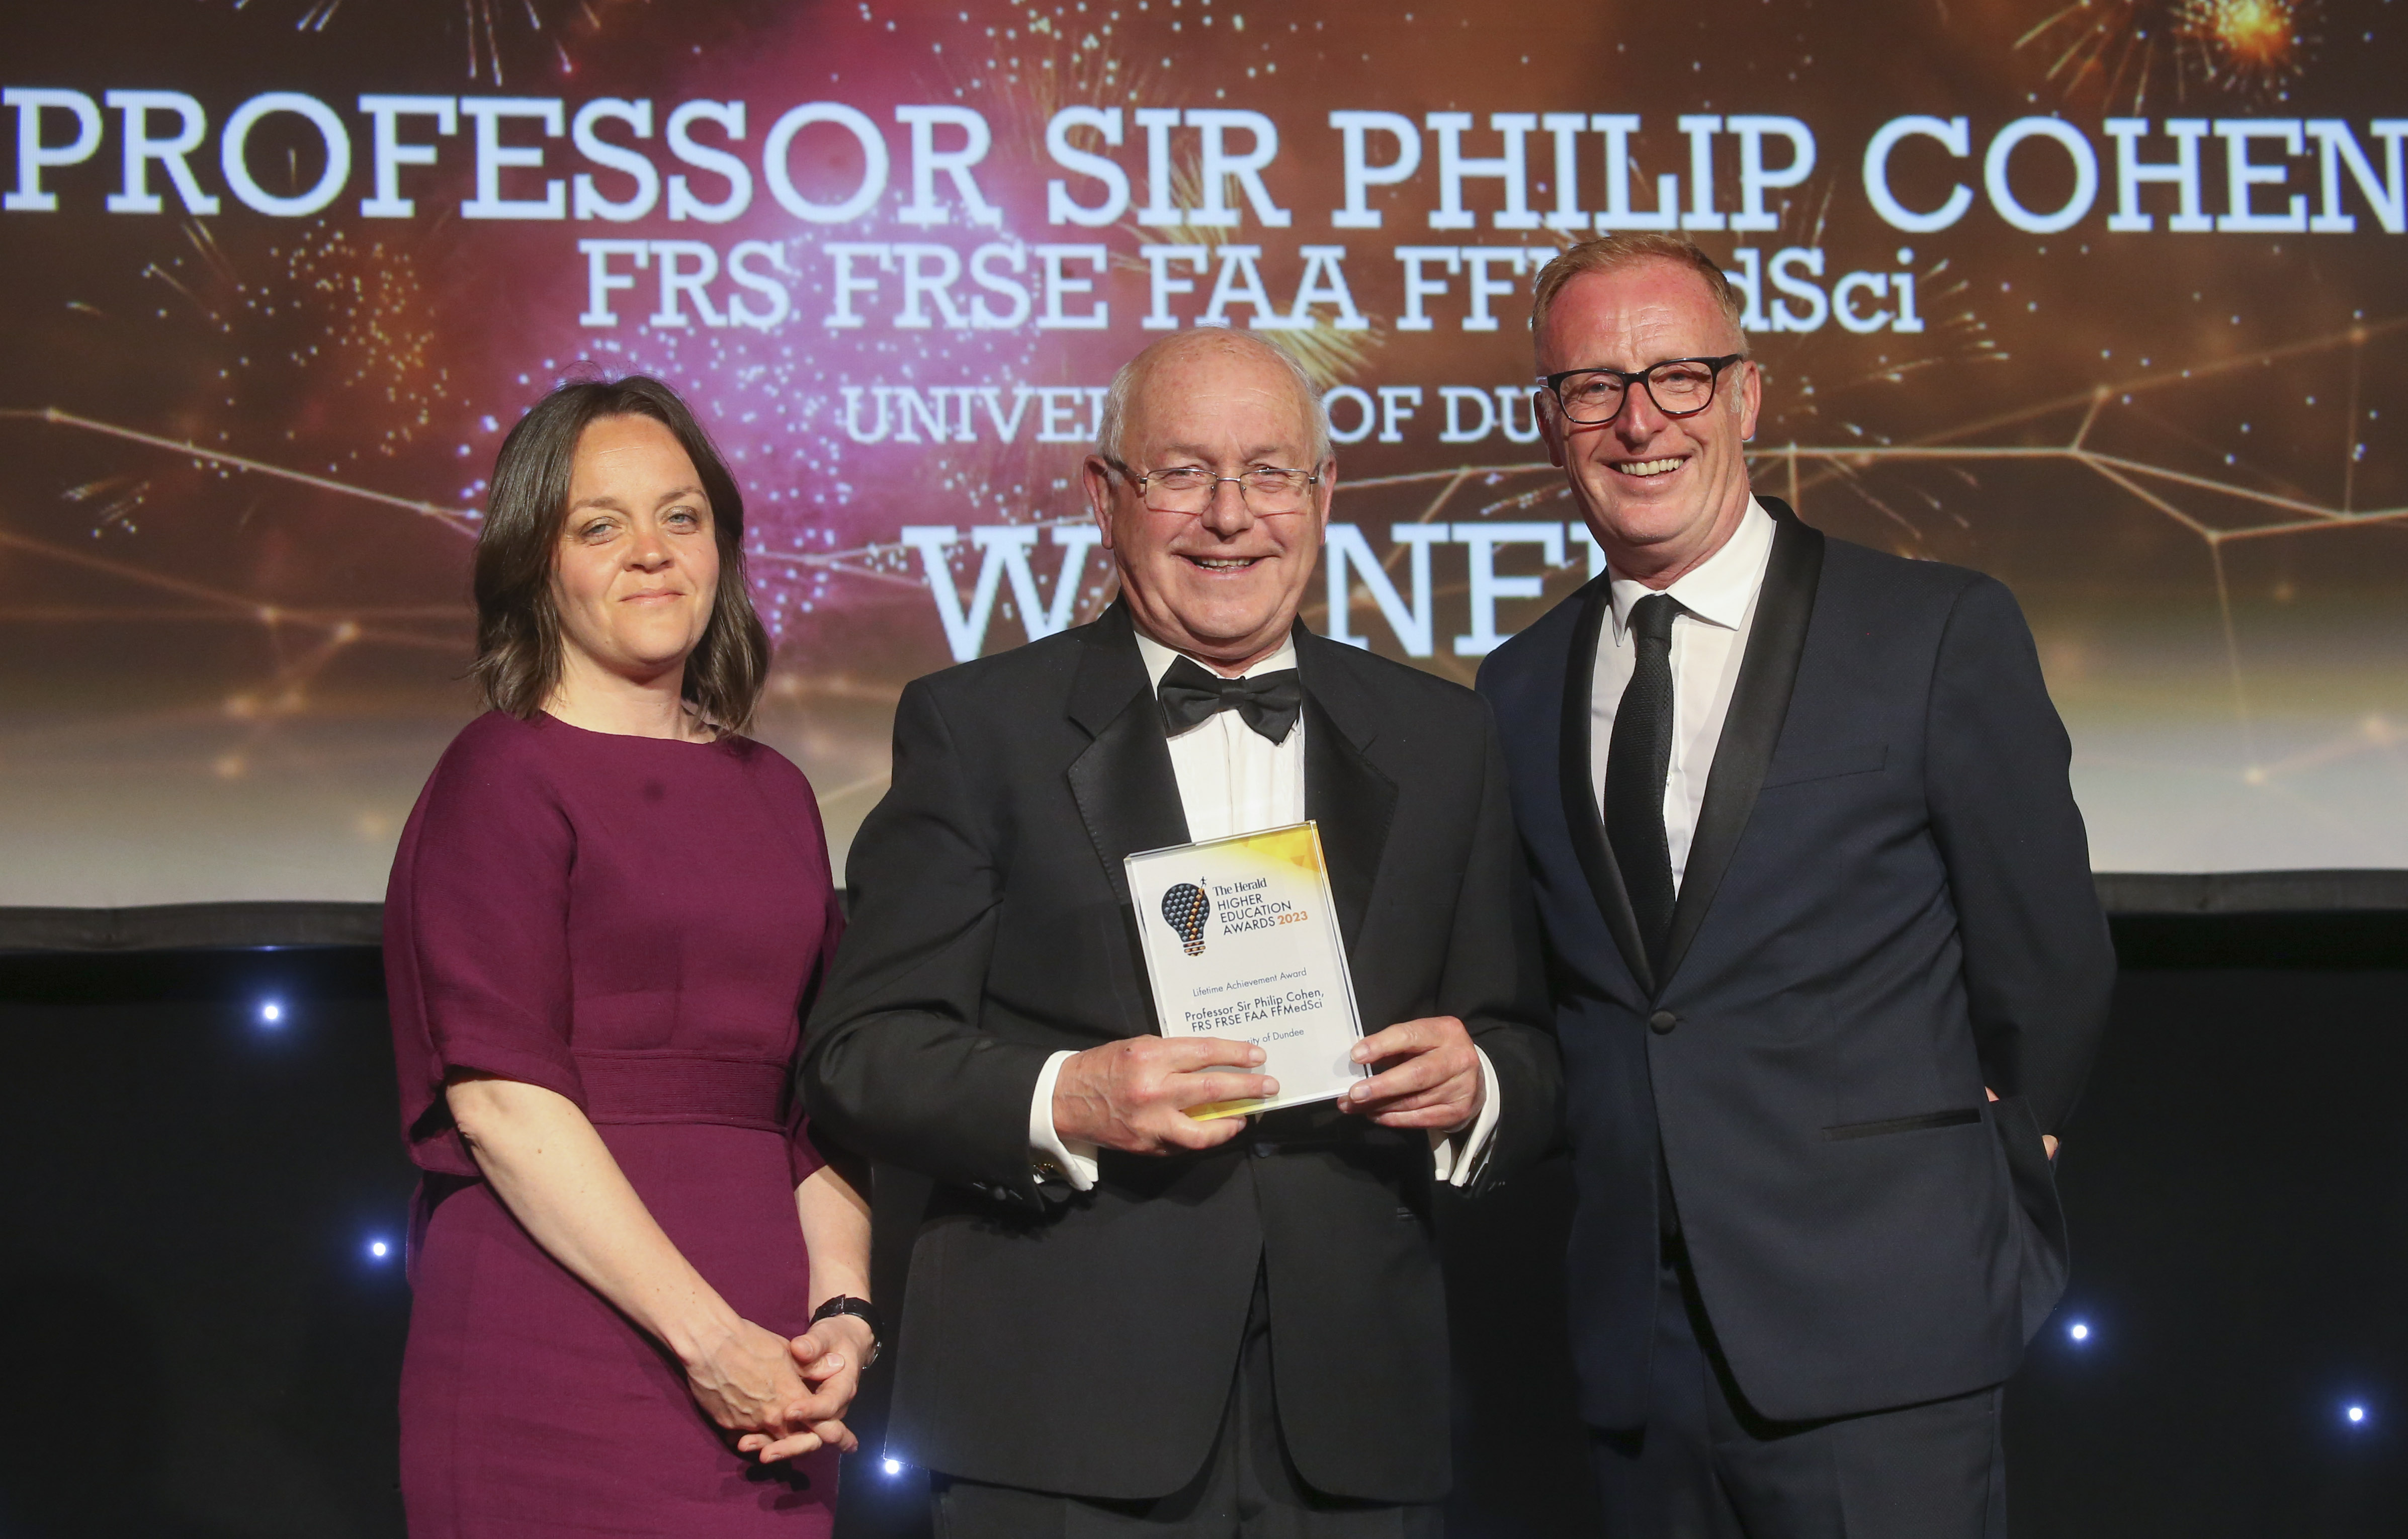 Philip receiving the award from Herald Editor Catherine Salmond and TV and radio personality Bryan Burnett, who was the compere for the evening